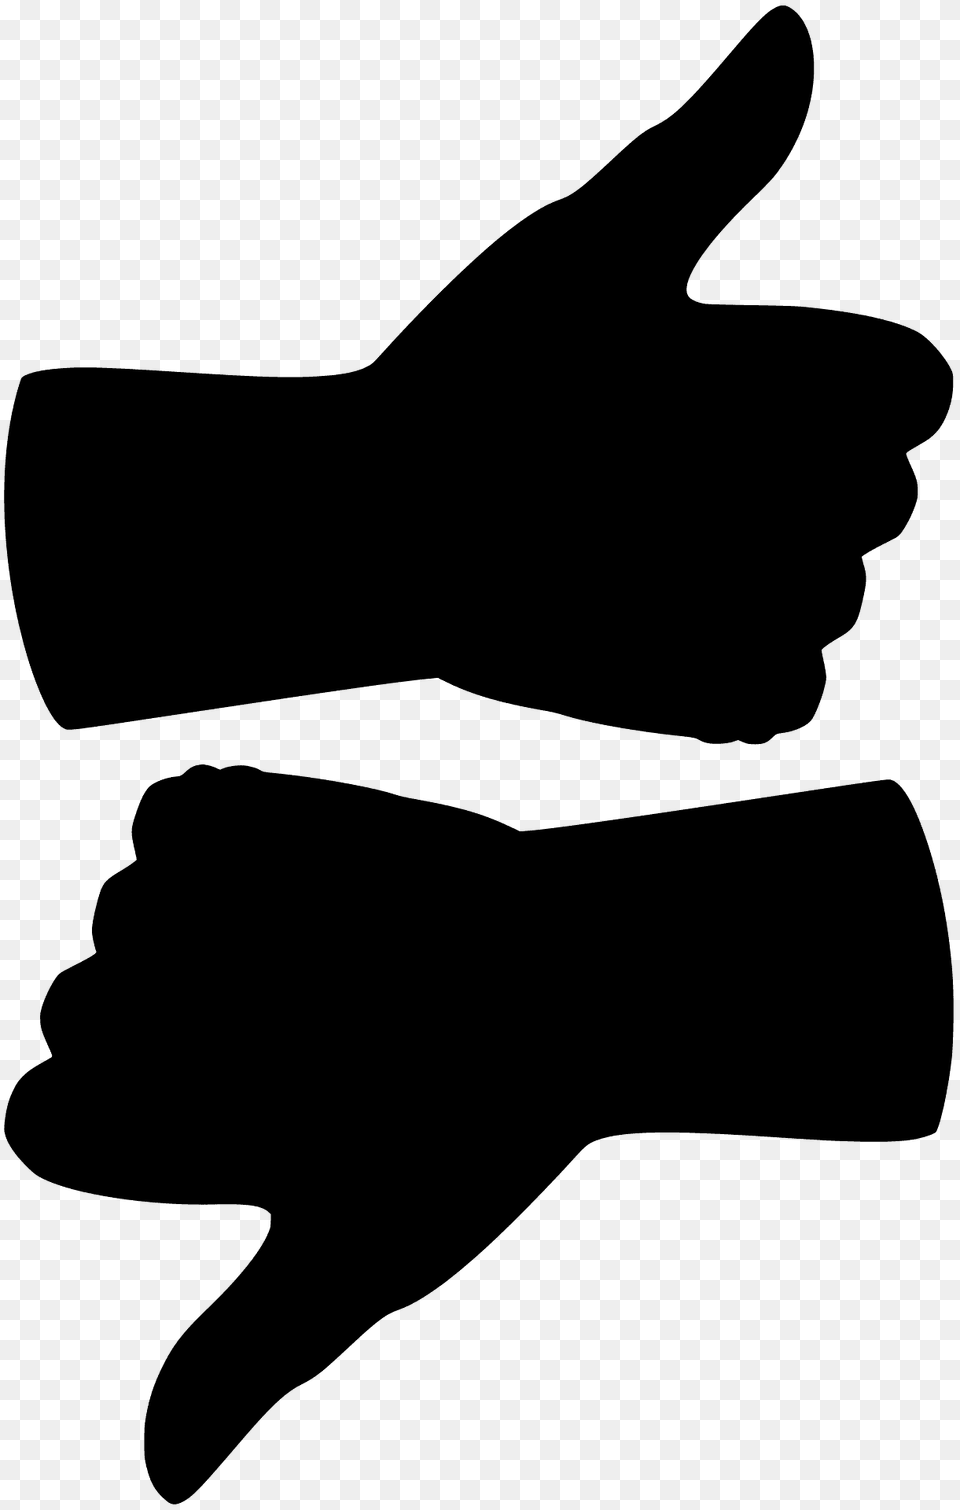 Thumb Up And Down Silhouette, Glove, Clothing, Shark, Sea Life Free Transparent Png